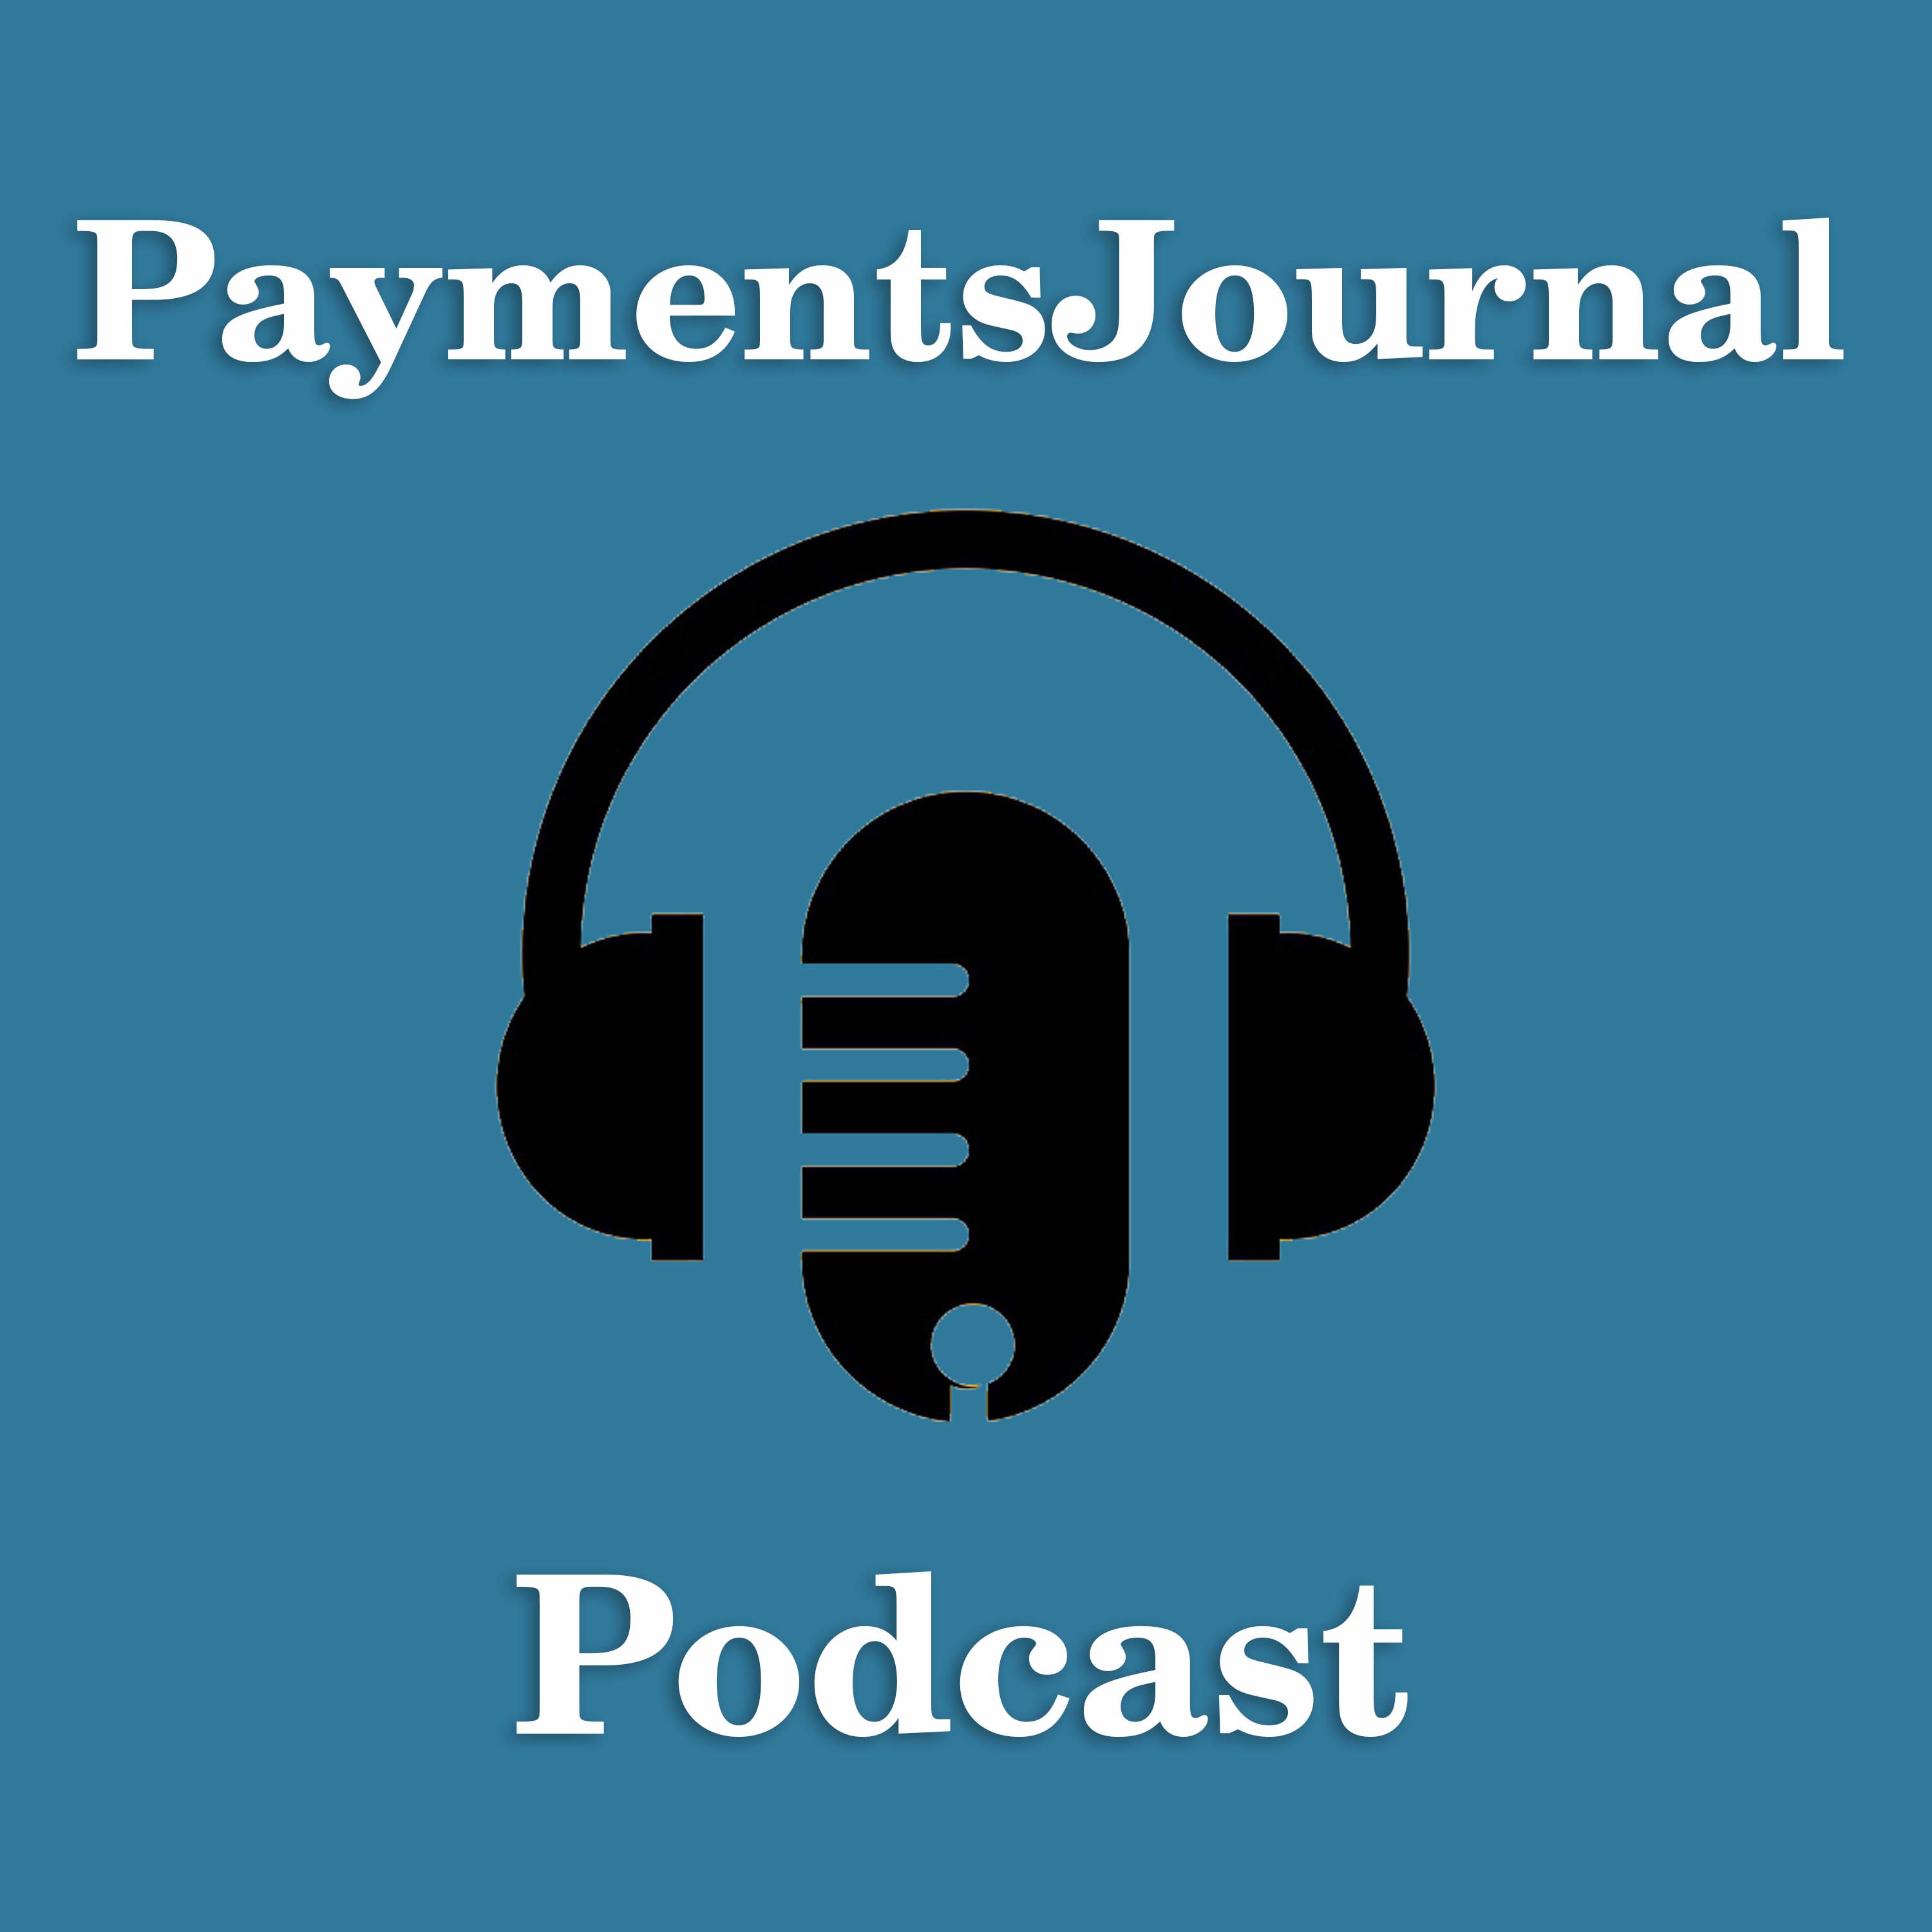 The PaymentsJournal Podcast